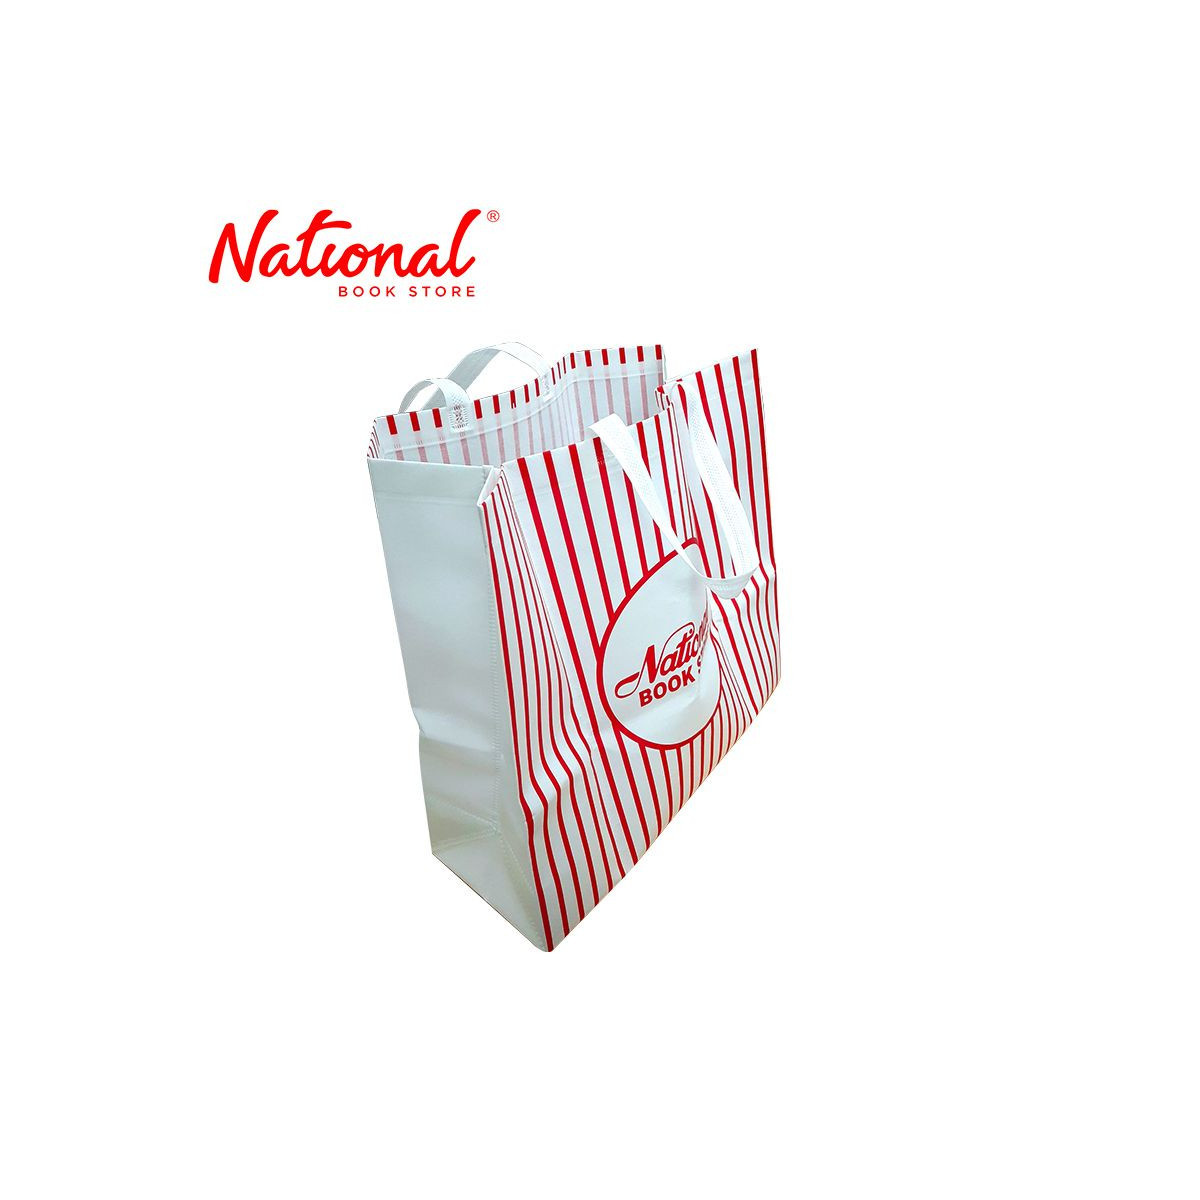 https://www.nationalbookstore.com/106165-thickbox_default/nbs-80th-non-woven-bag-jumbo-laminated-sp-01-20-x-75-x-185-inches-shopping-bags.jpg